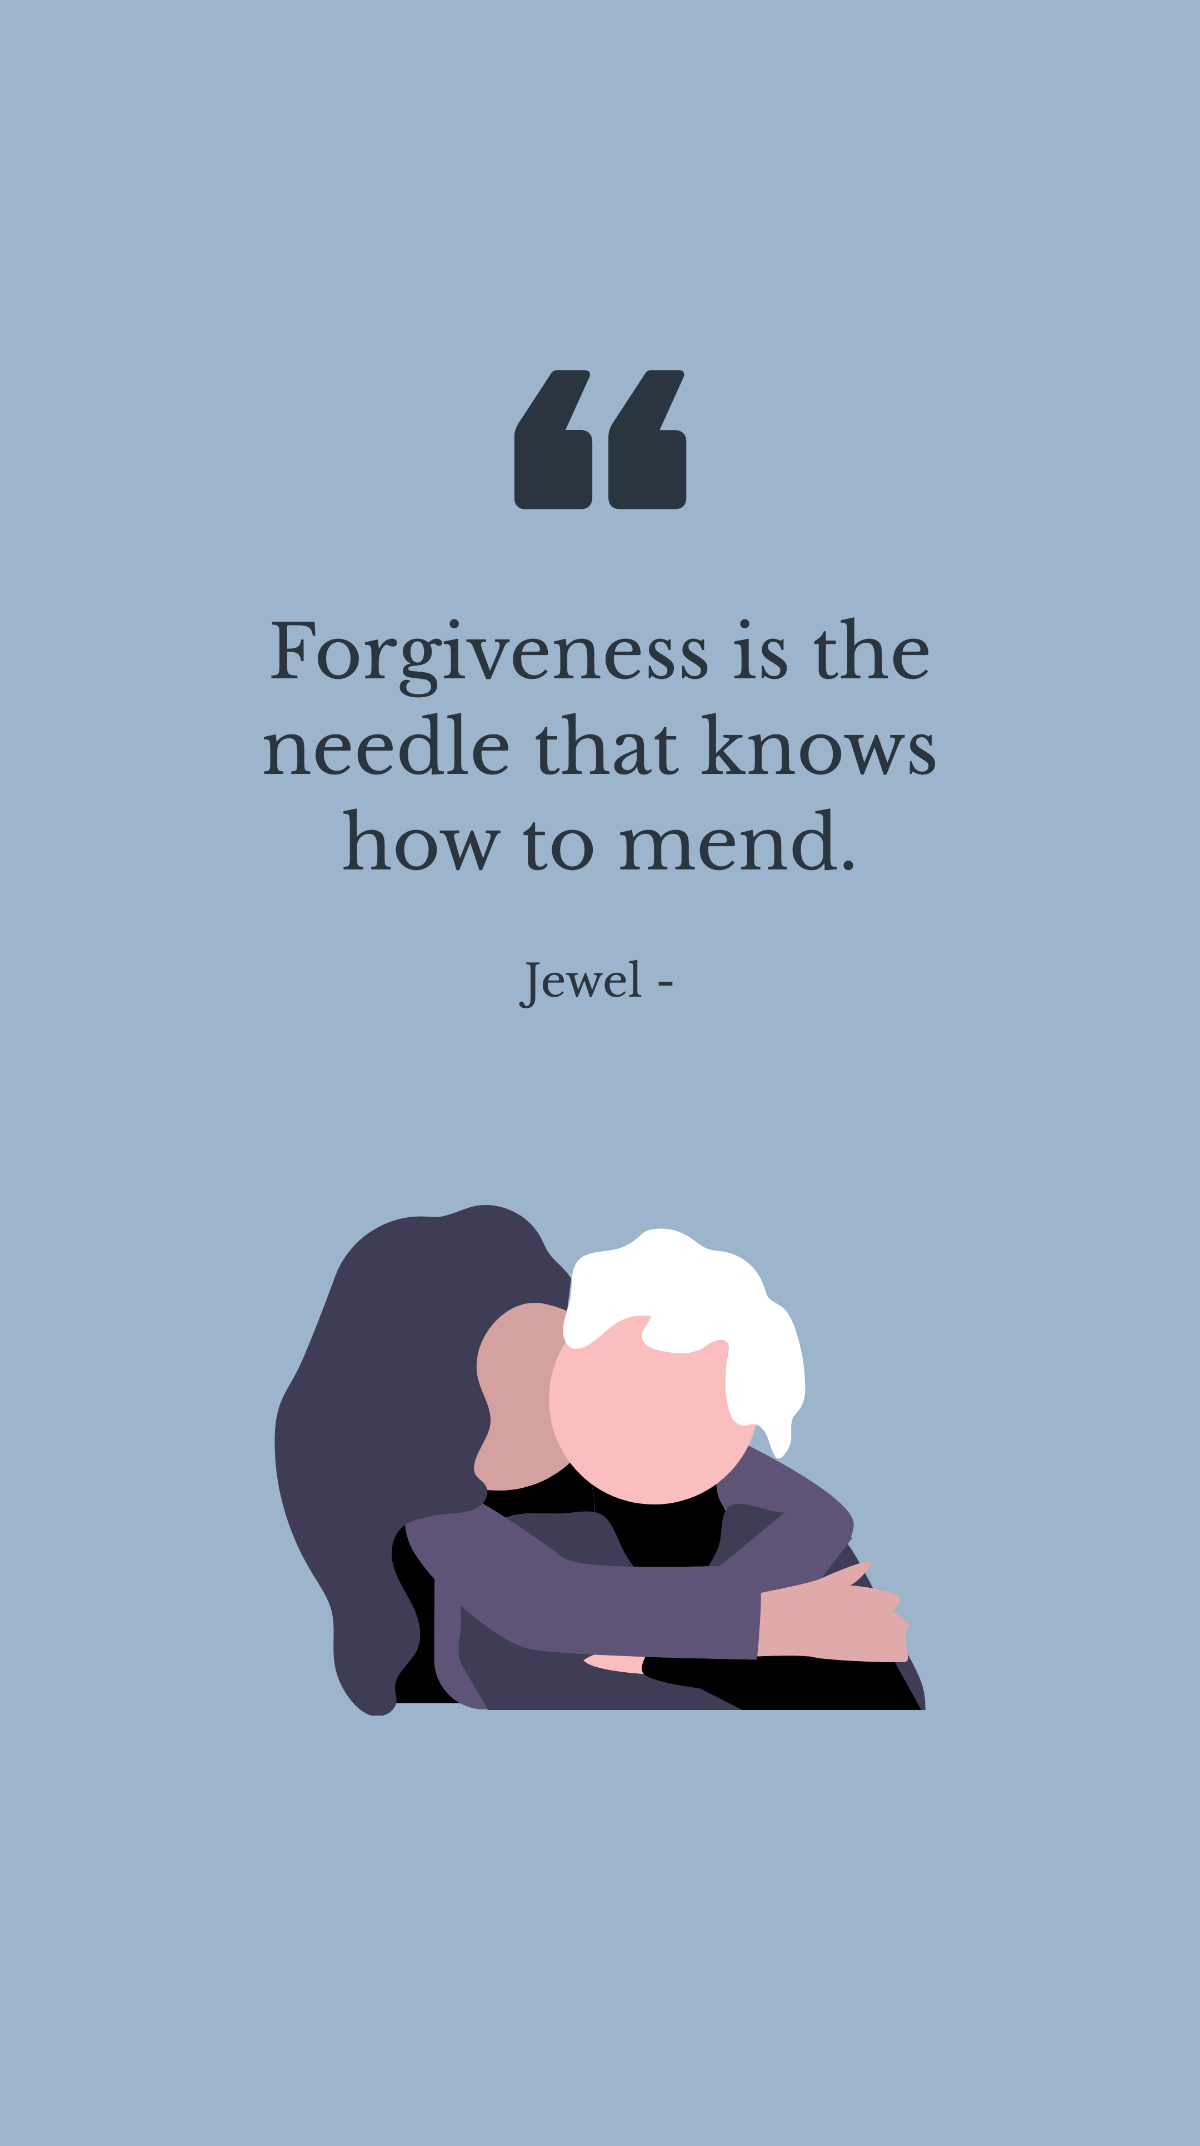 Free Jewel - Forgiveness is the needle that knows how to mend. Template